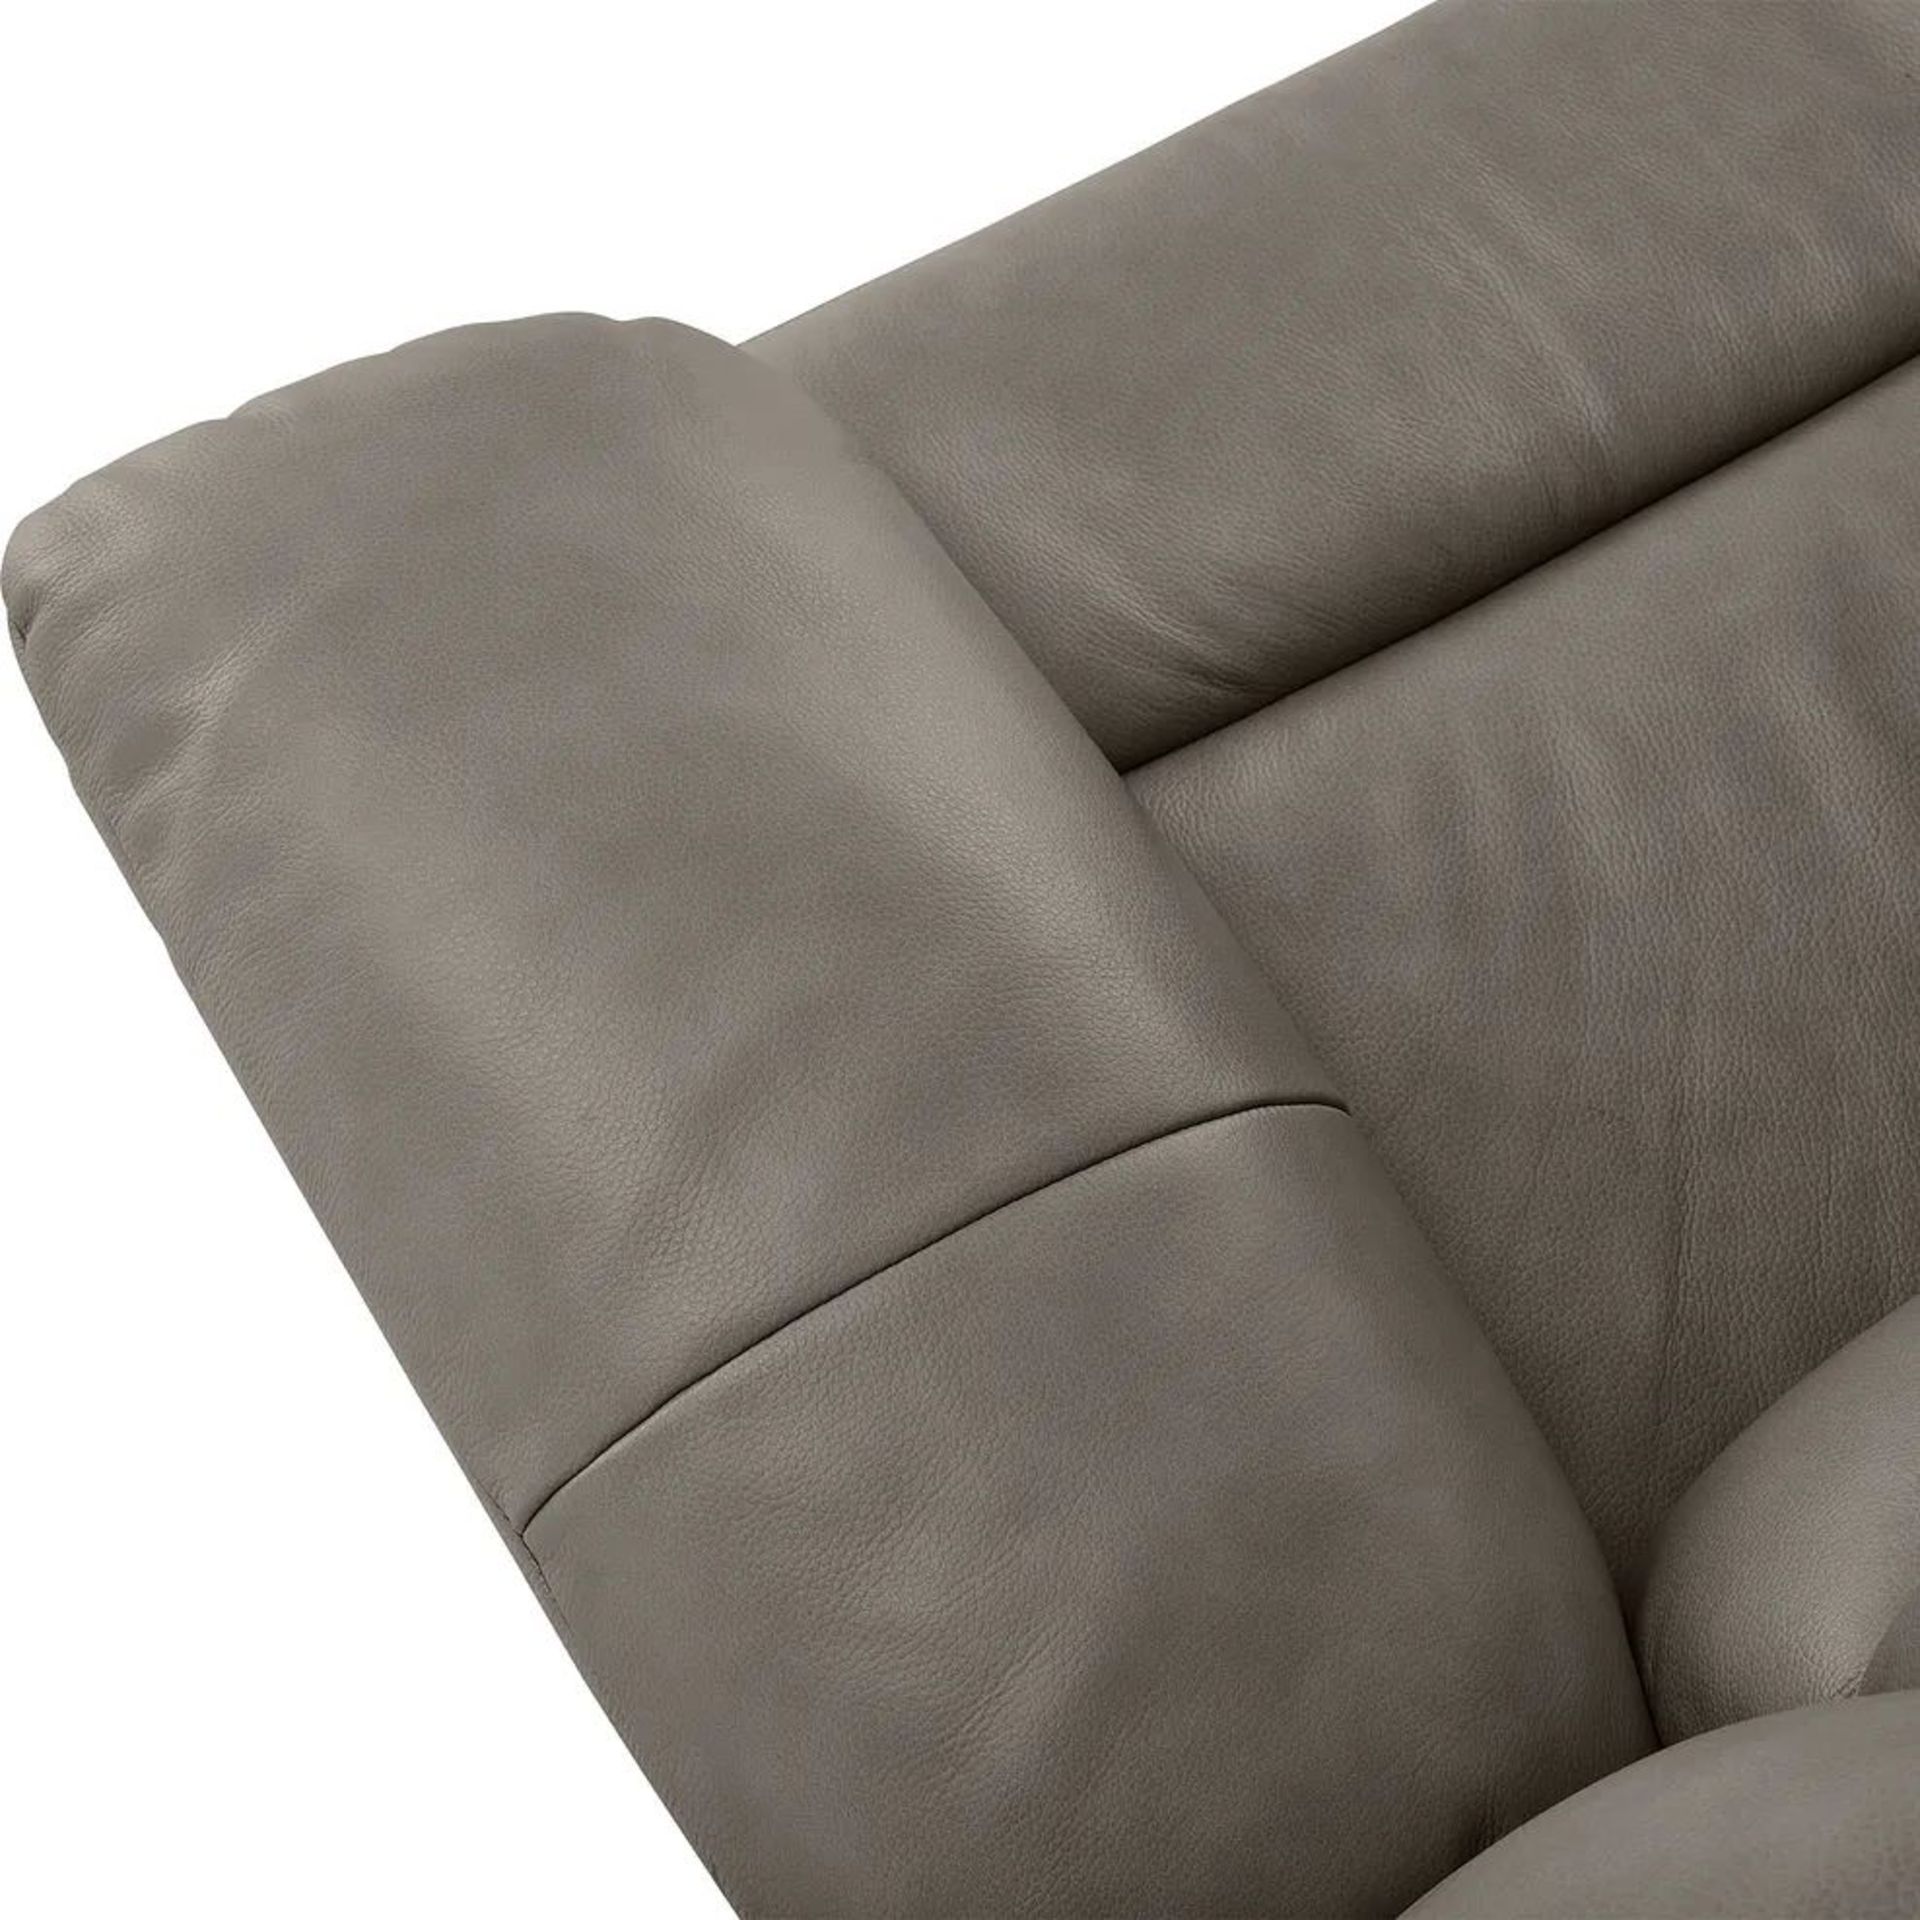 BRAND NEW MARLOW 3 Seater Electric Recliner Sofa - DARK GREY LEATHER. RRP £1849. Our Marlow - Bild 10 aus 11